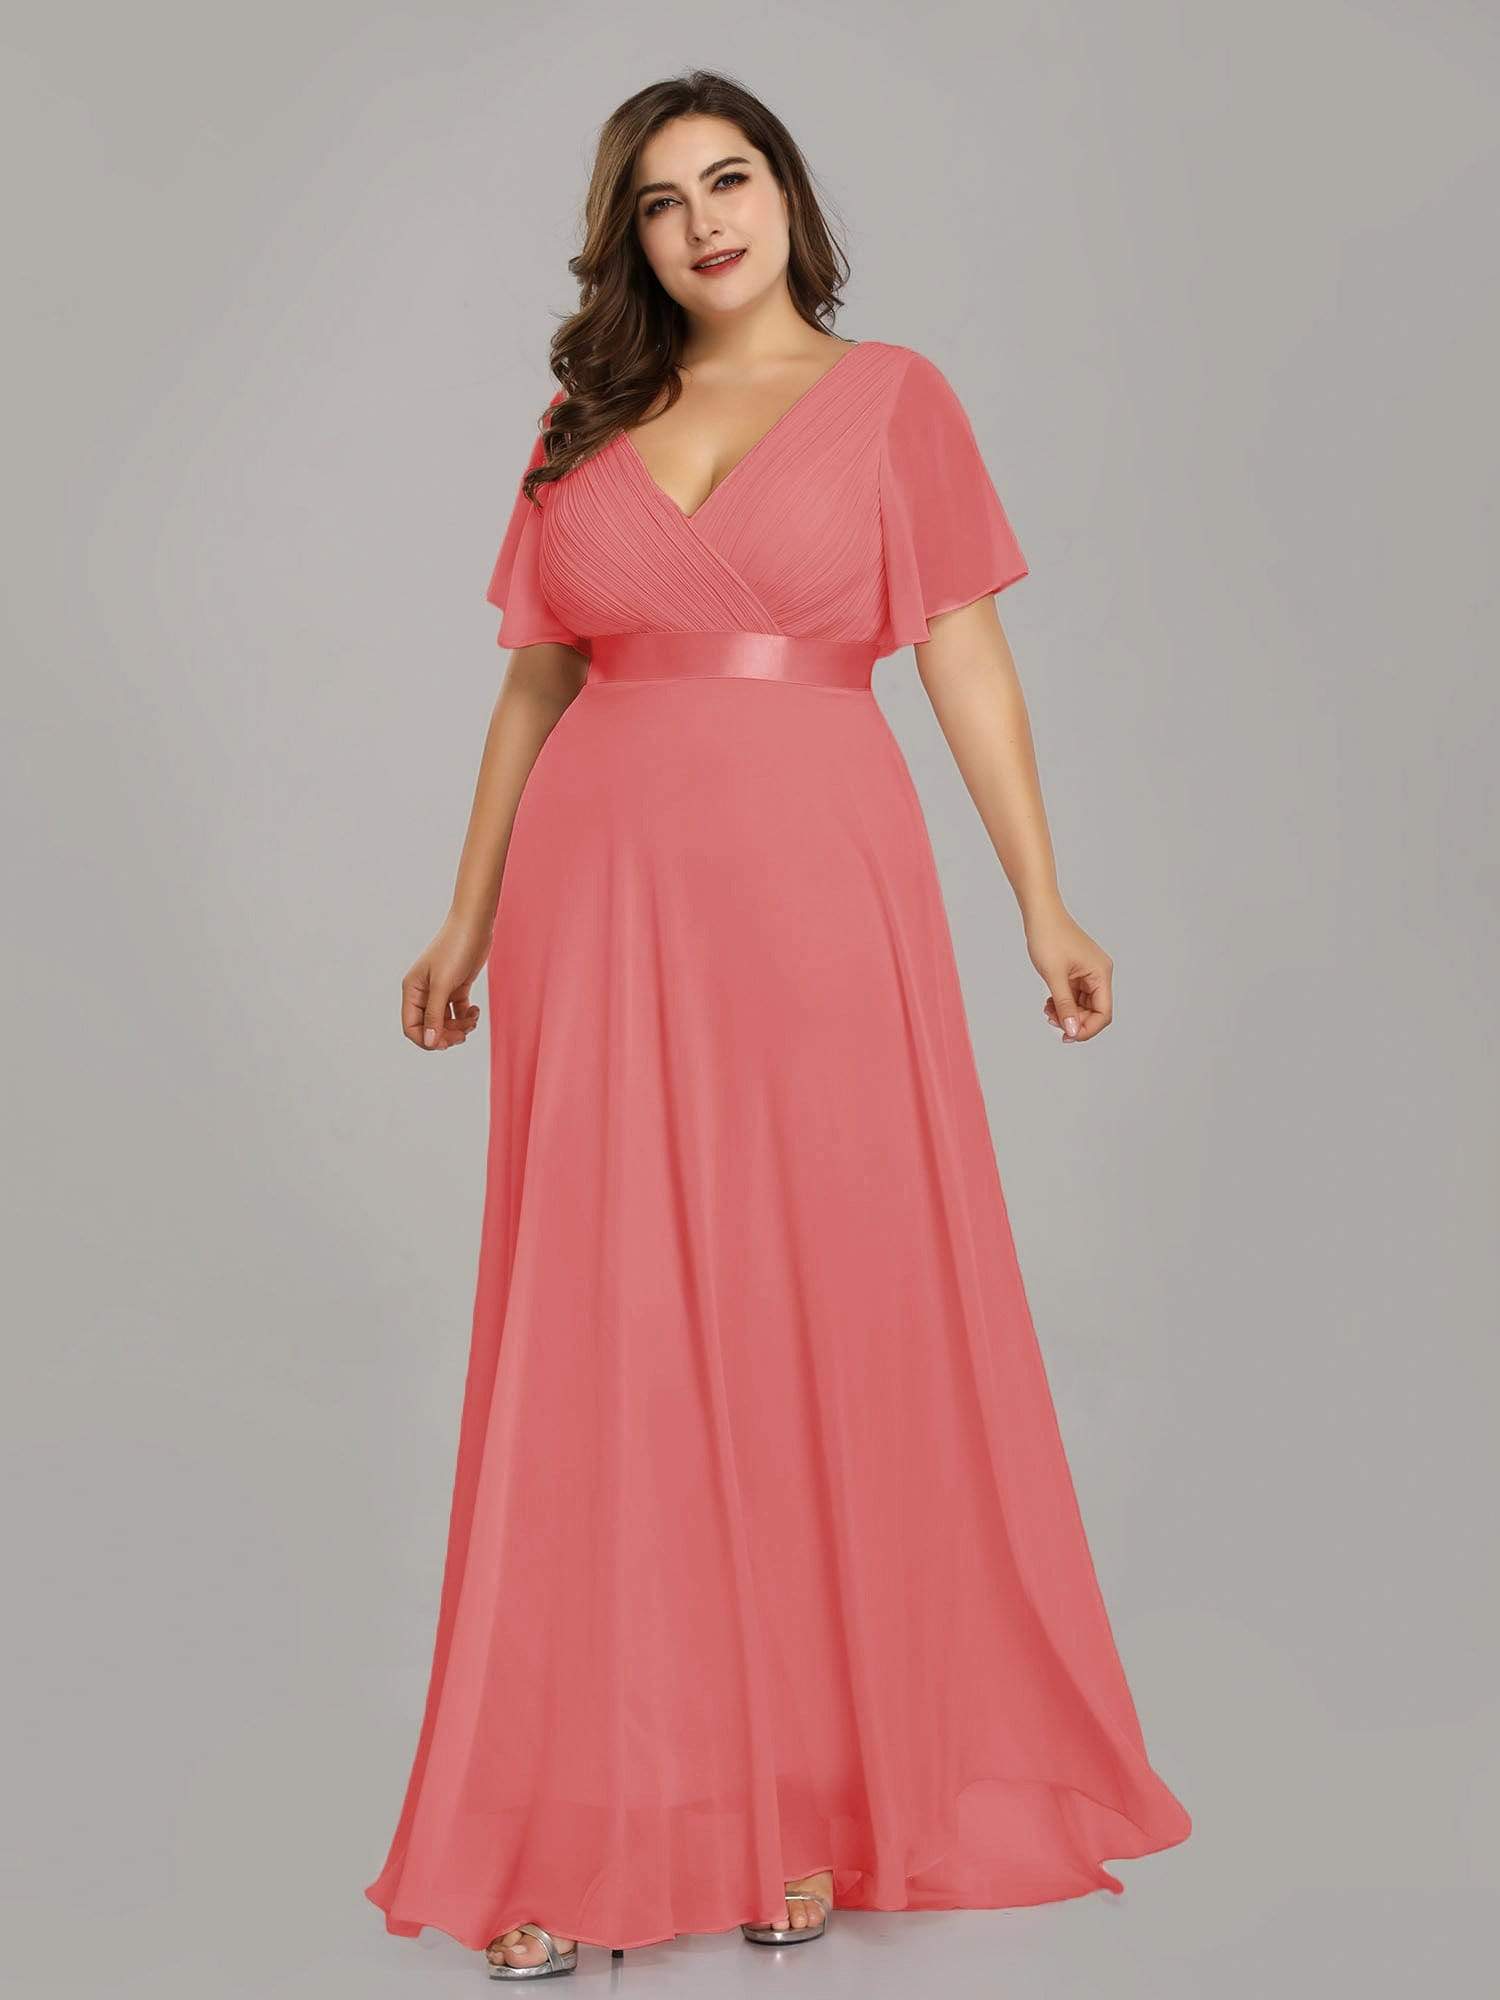 COLOR=Coral | Plus Size Long Empire Waist Evening Dress With Short Flutter Sleeves-Coral 1